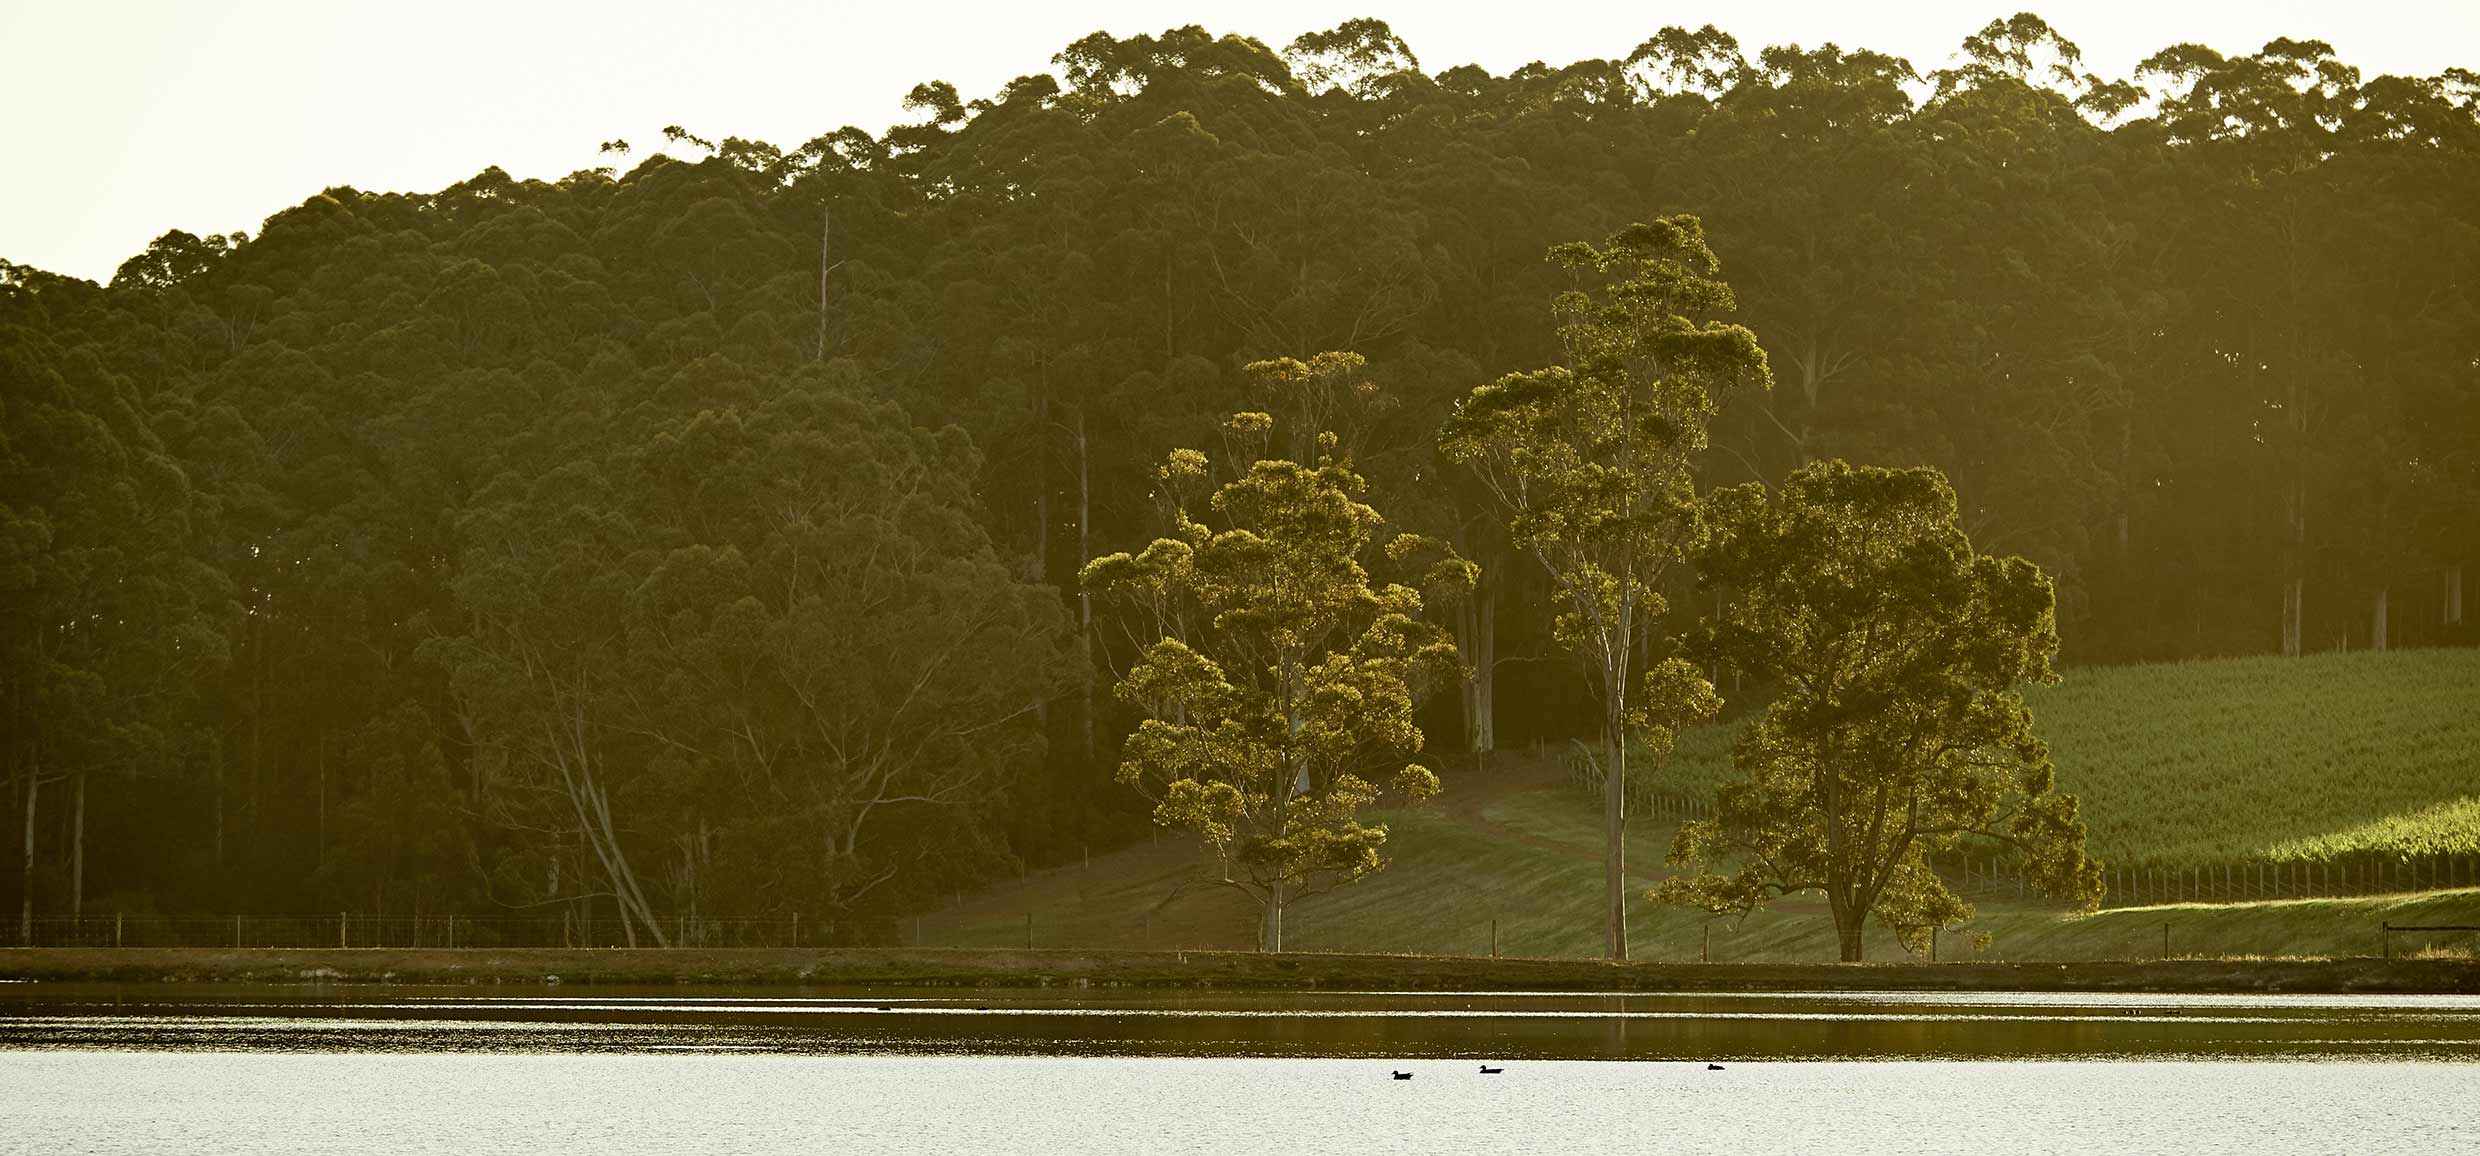 View across a still lake, with three ducks on, in front of three tall trees on the shoreline. A vineyard gently slopes up to the right and a large bank of trees fill the scene across the back.